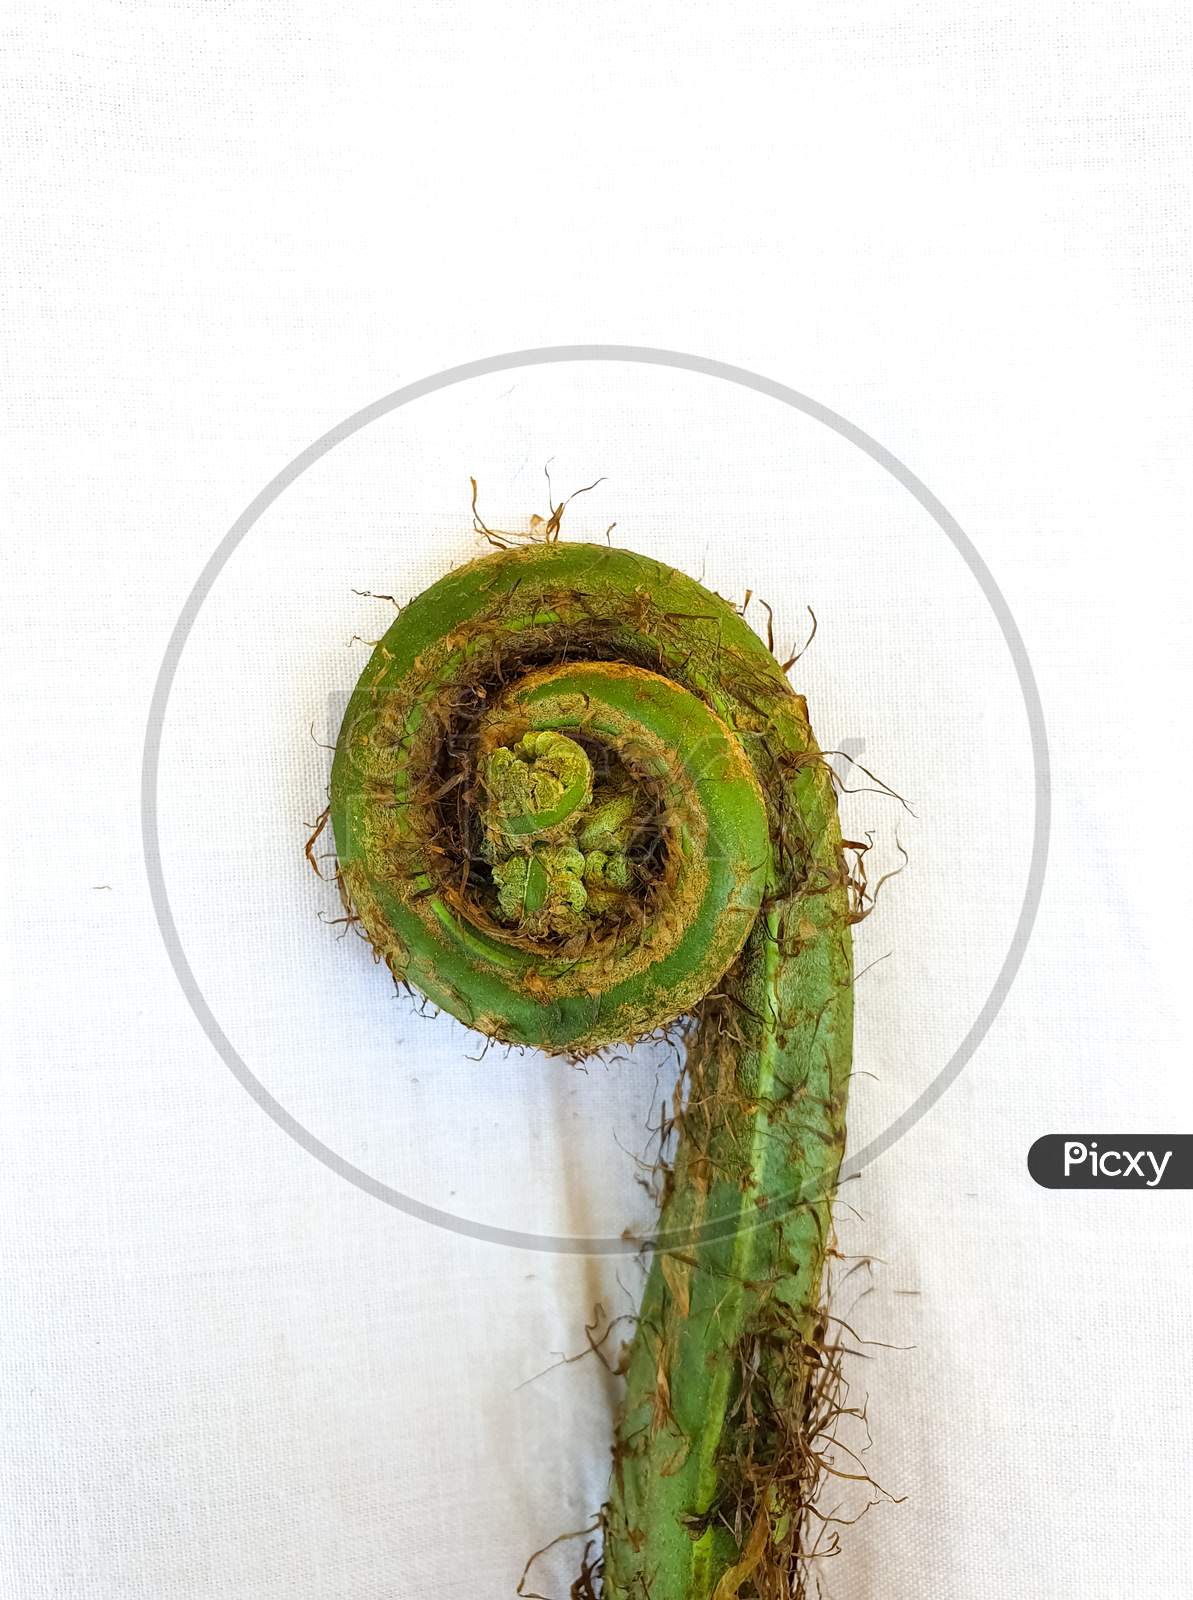 Wild vegetables - Studio shot of fiddlehead fern with white background